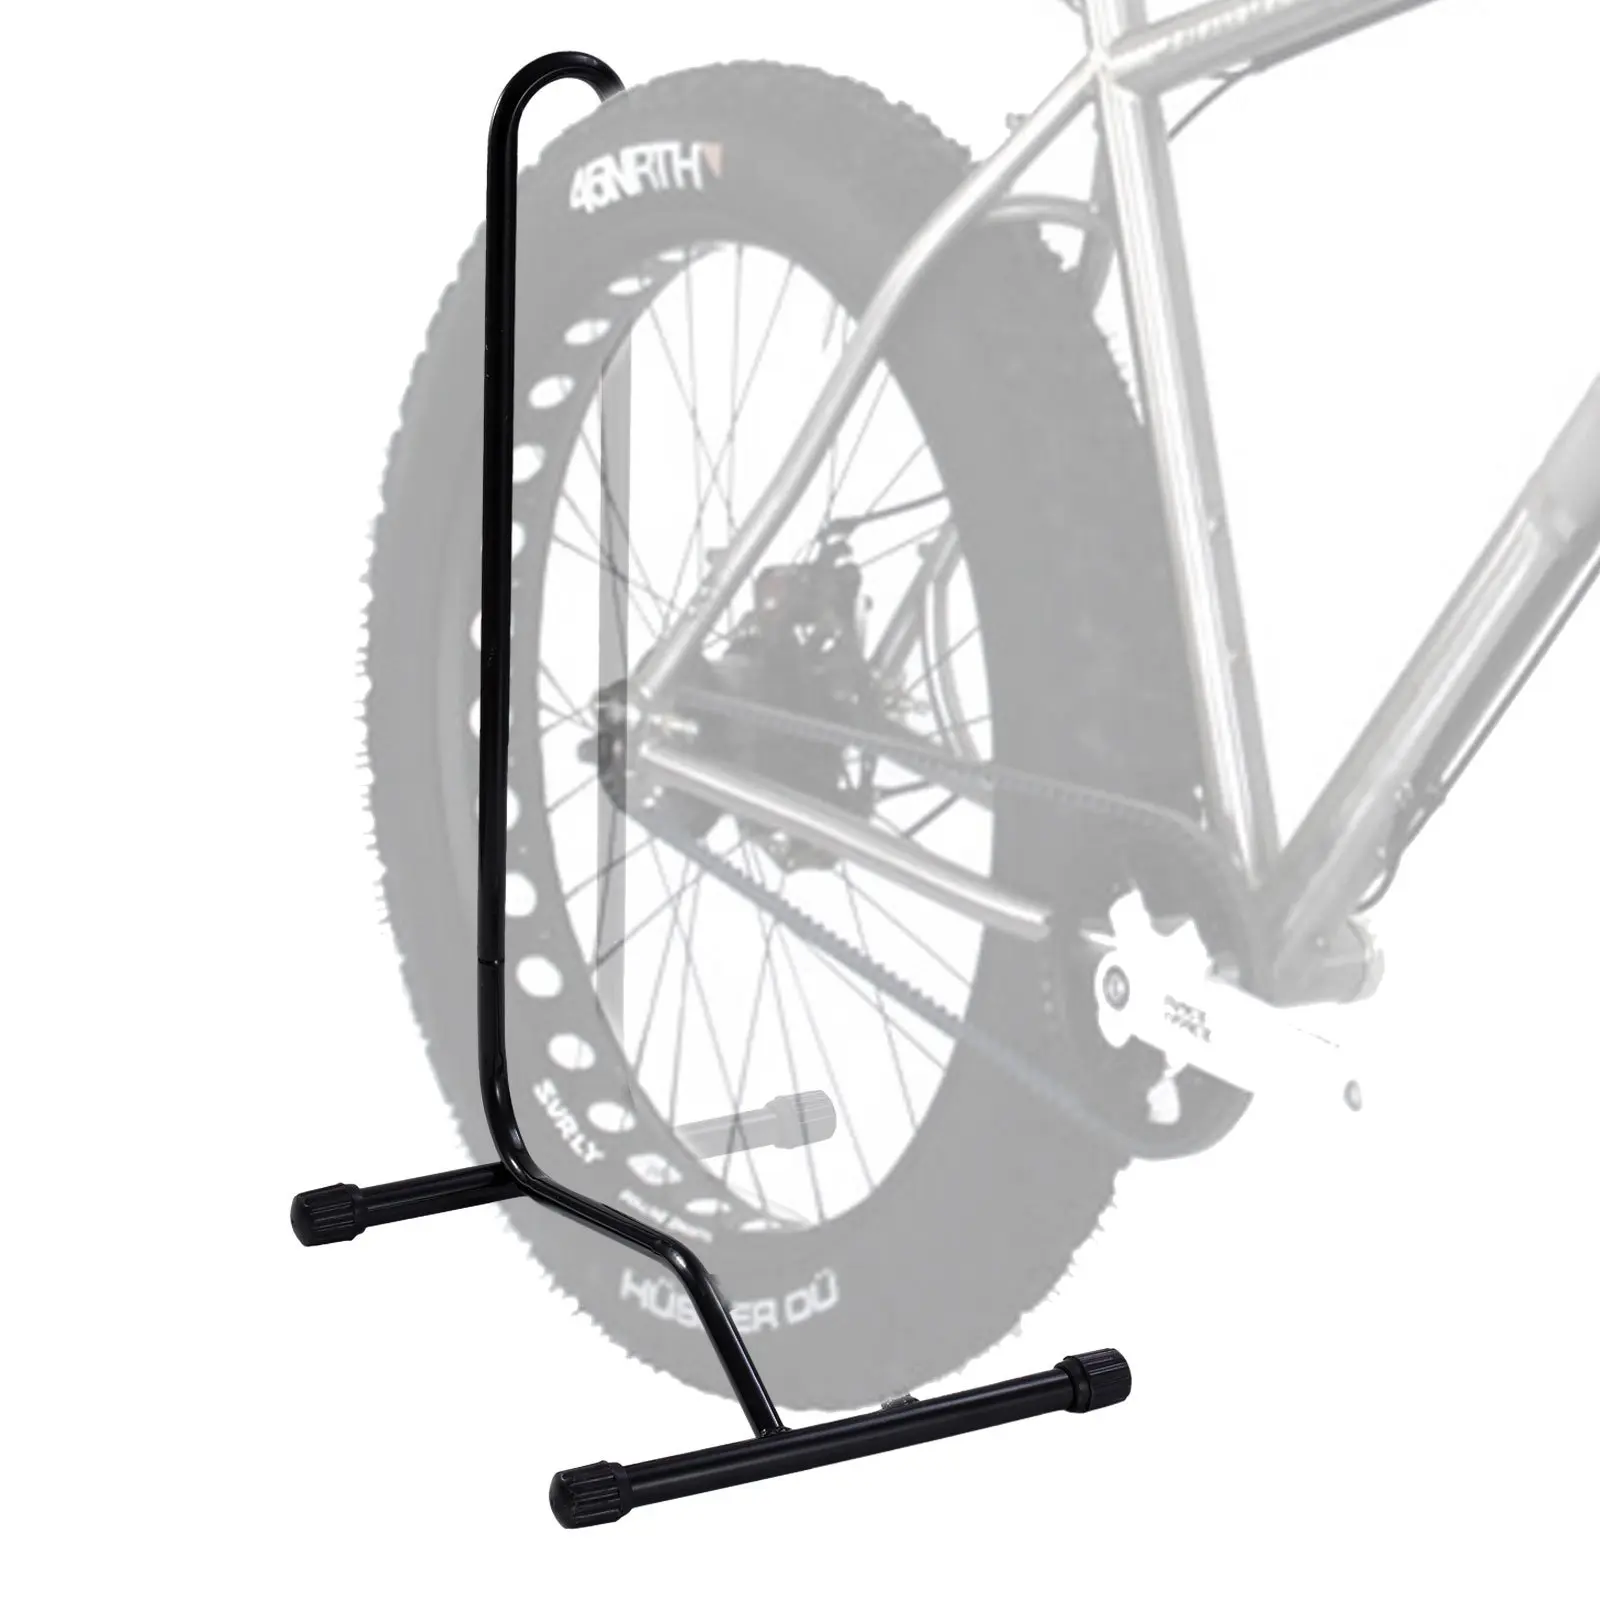 single bicycle floor stand